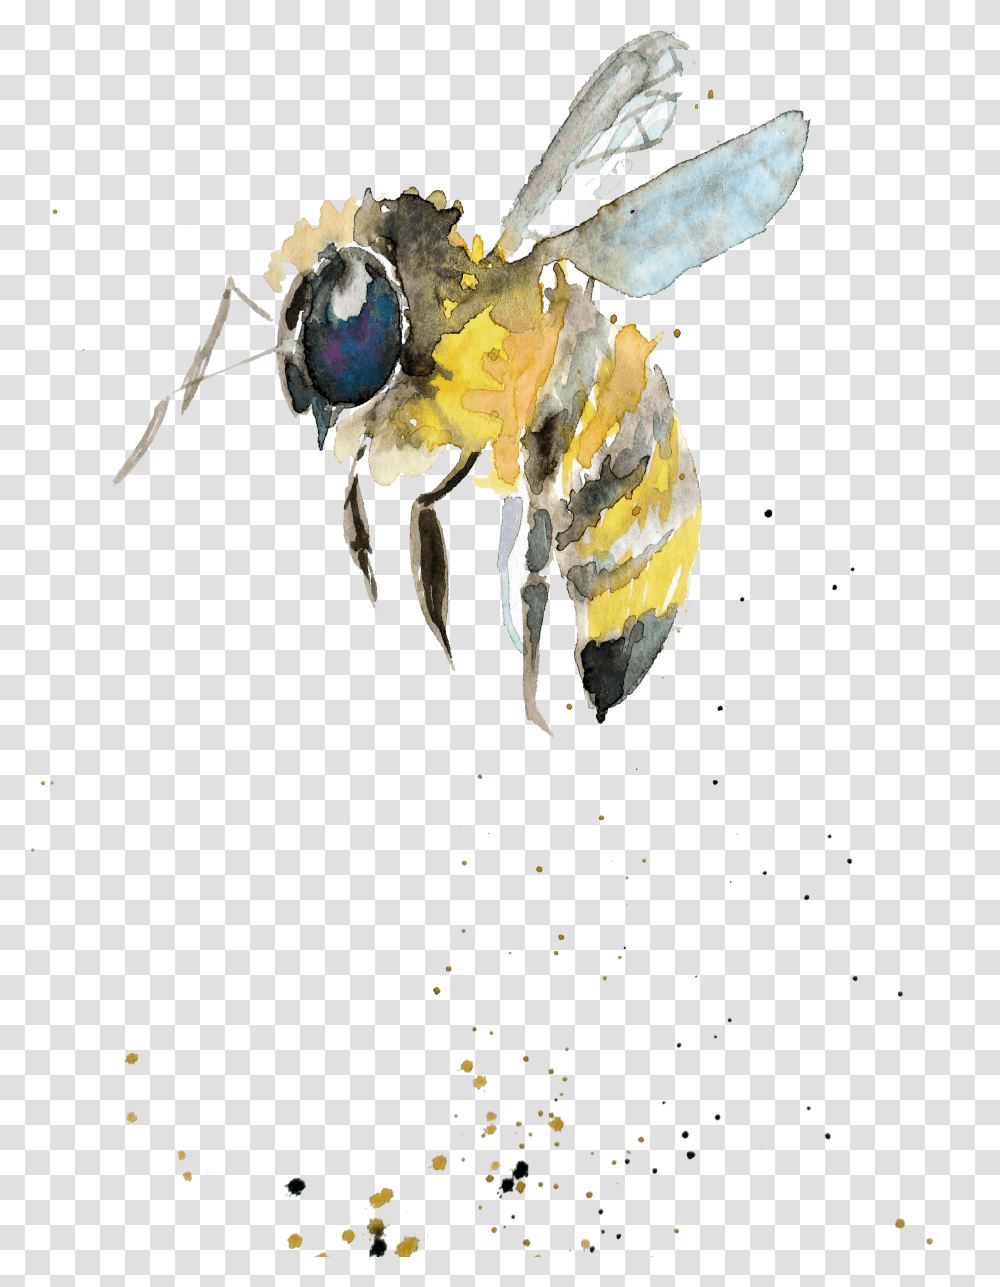 Bumblebee Watercolor Painting Drawing Insect Watercolor Watercolor Bumble Bee, Apidae, Invertebrate, Animal, Honey Bee Transparent Png